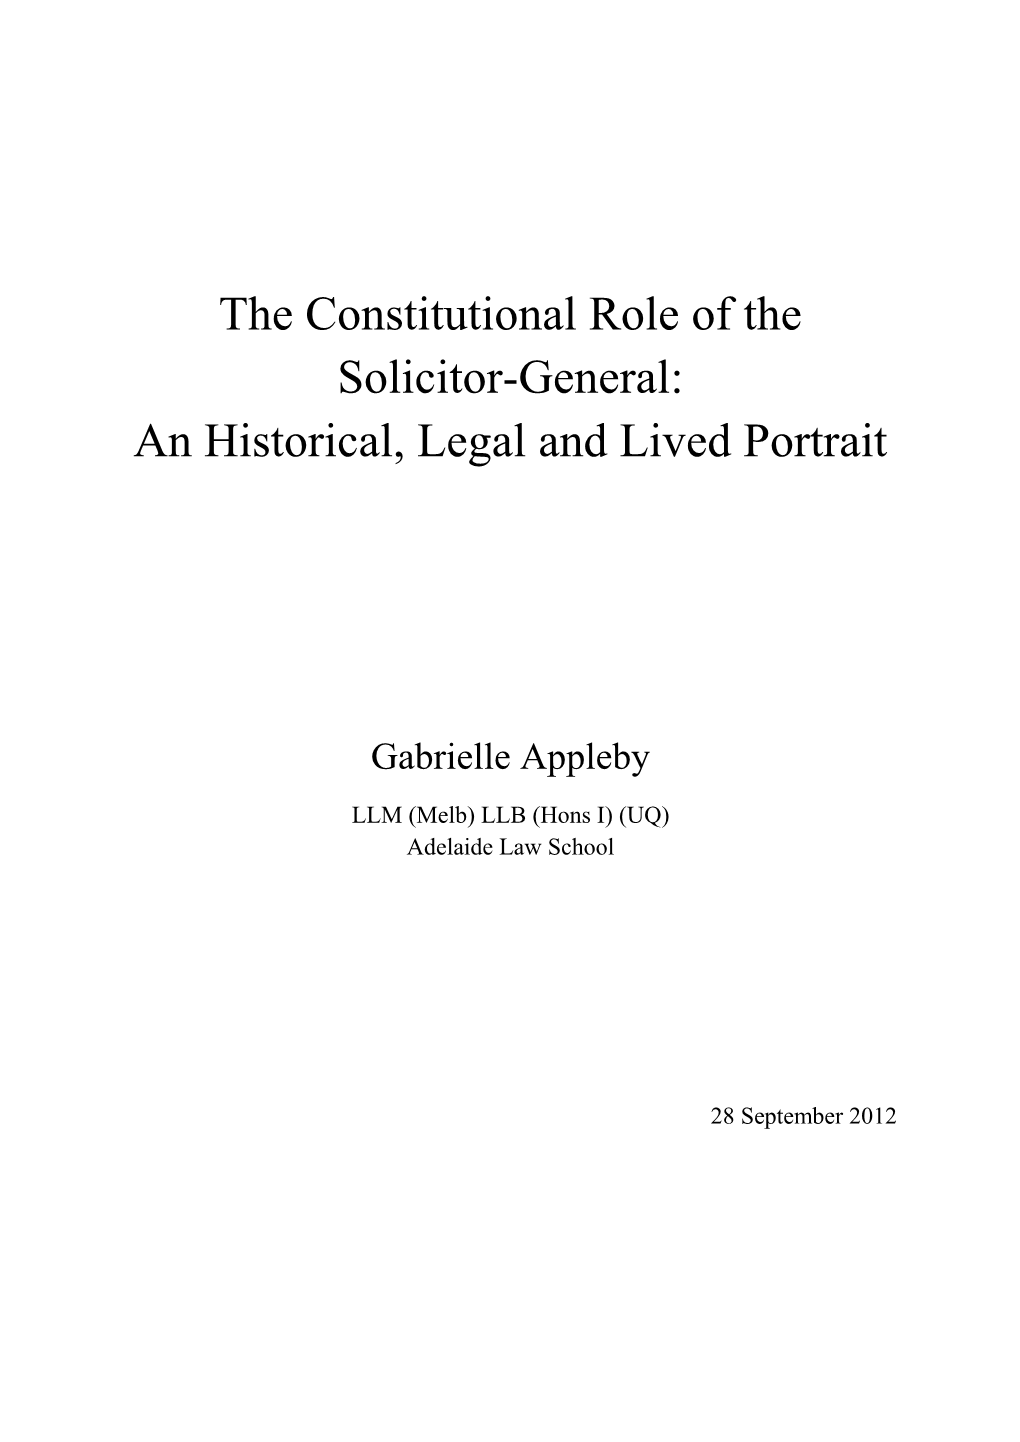 The Constitutional Role of the Solicitor-General: an Historical, Legal and Lived Portrait